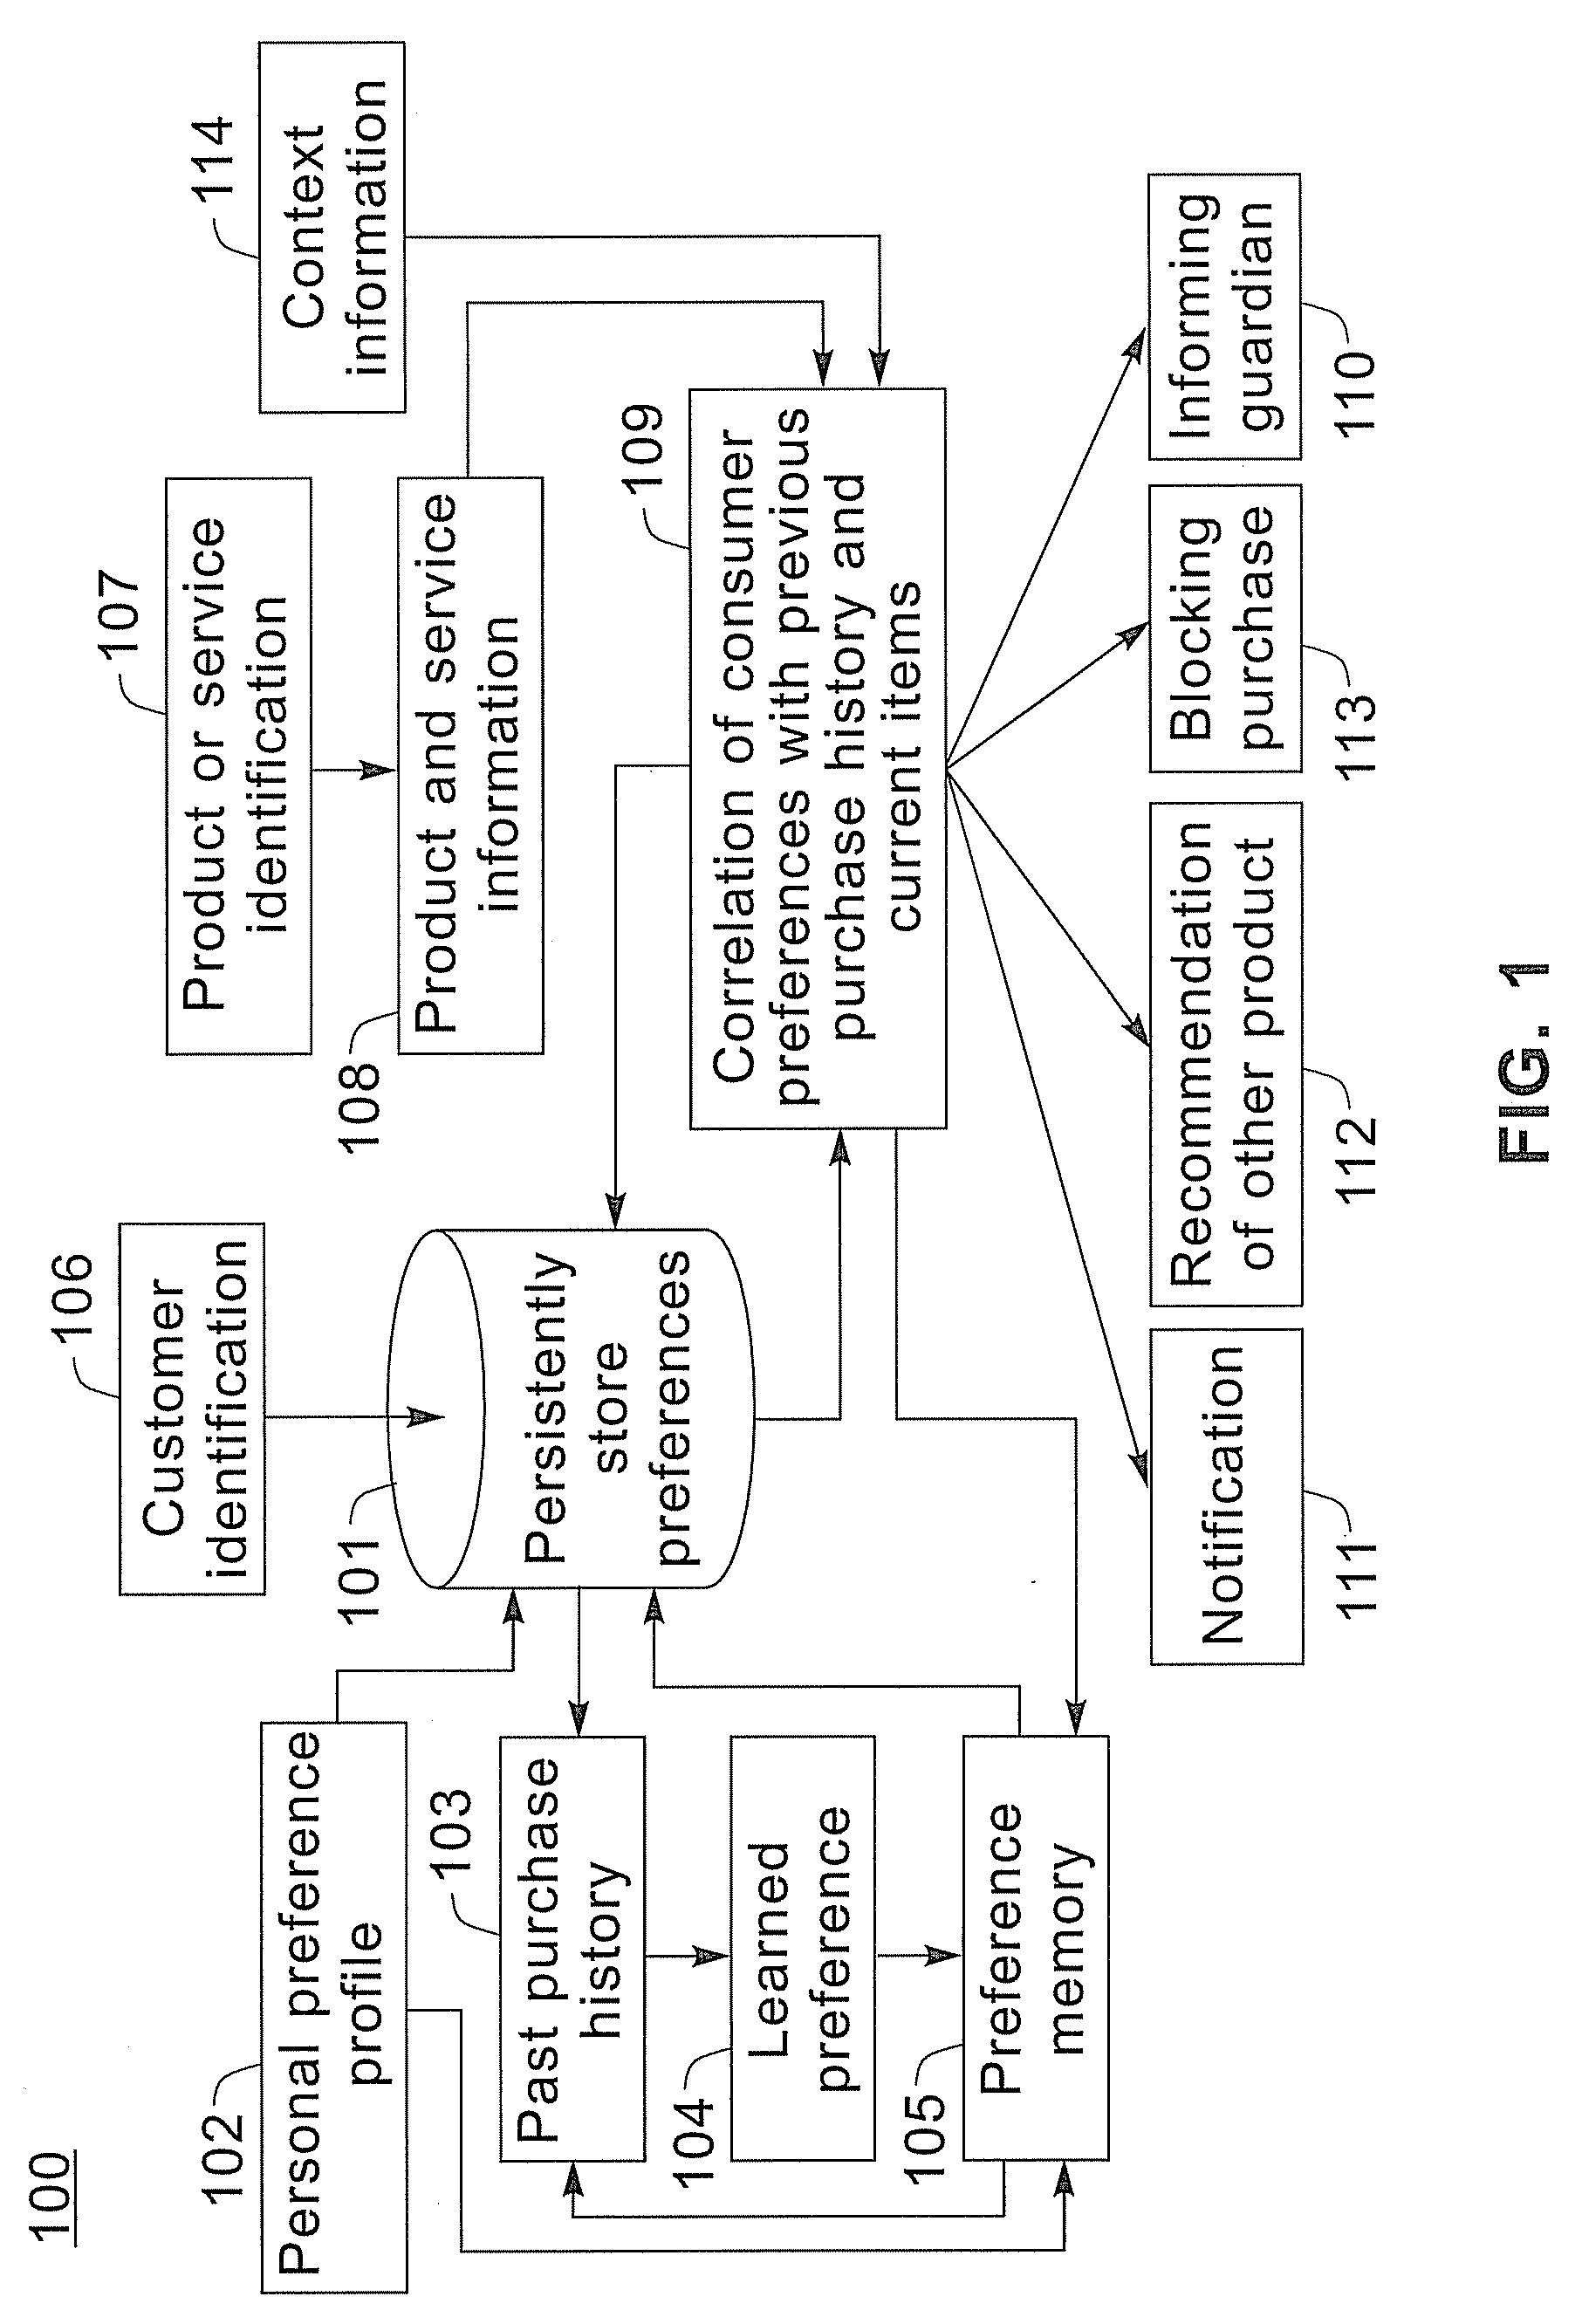 Method and system for validating consumer preferences and purchase items at point of sale